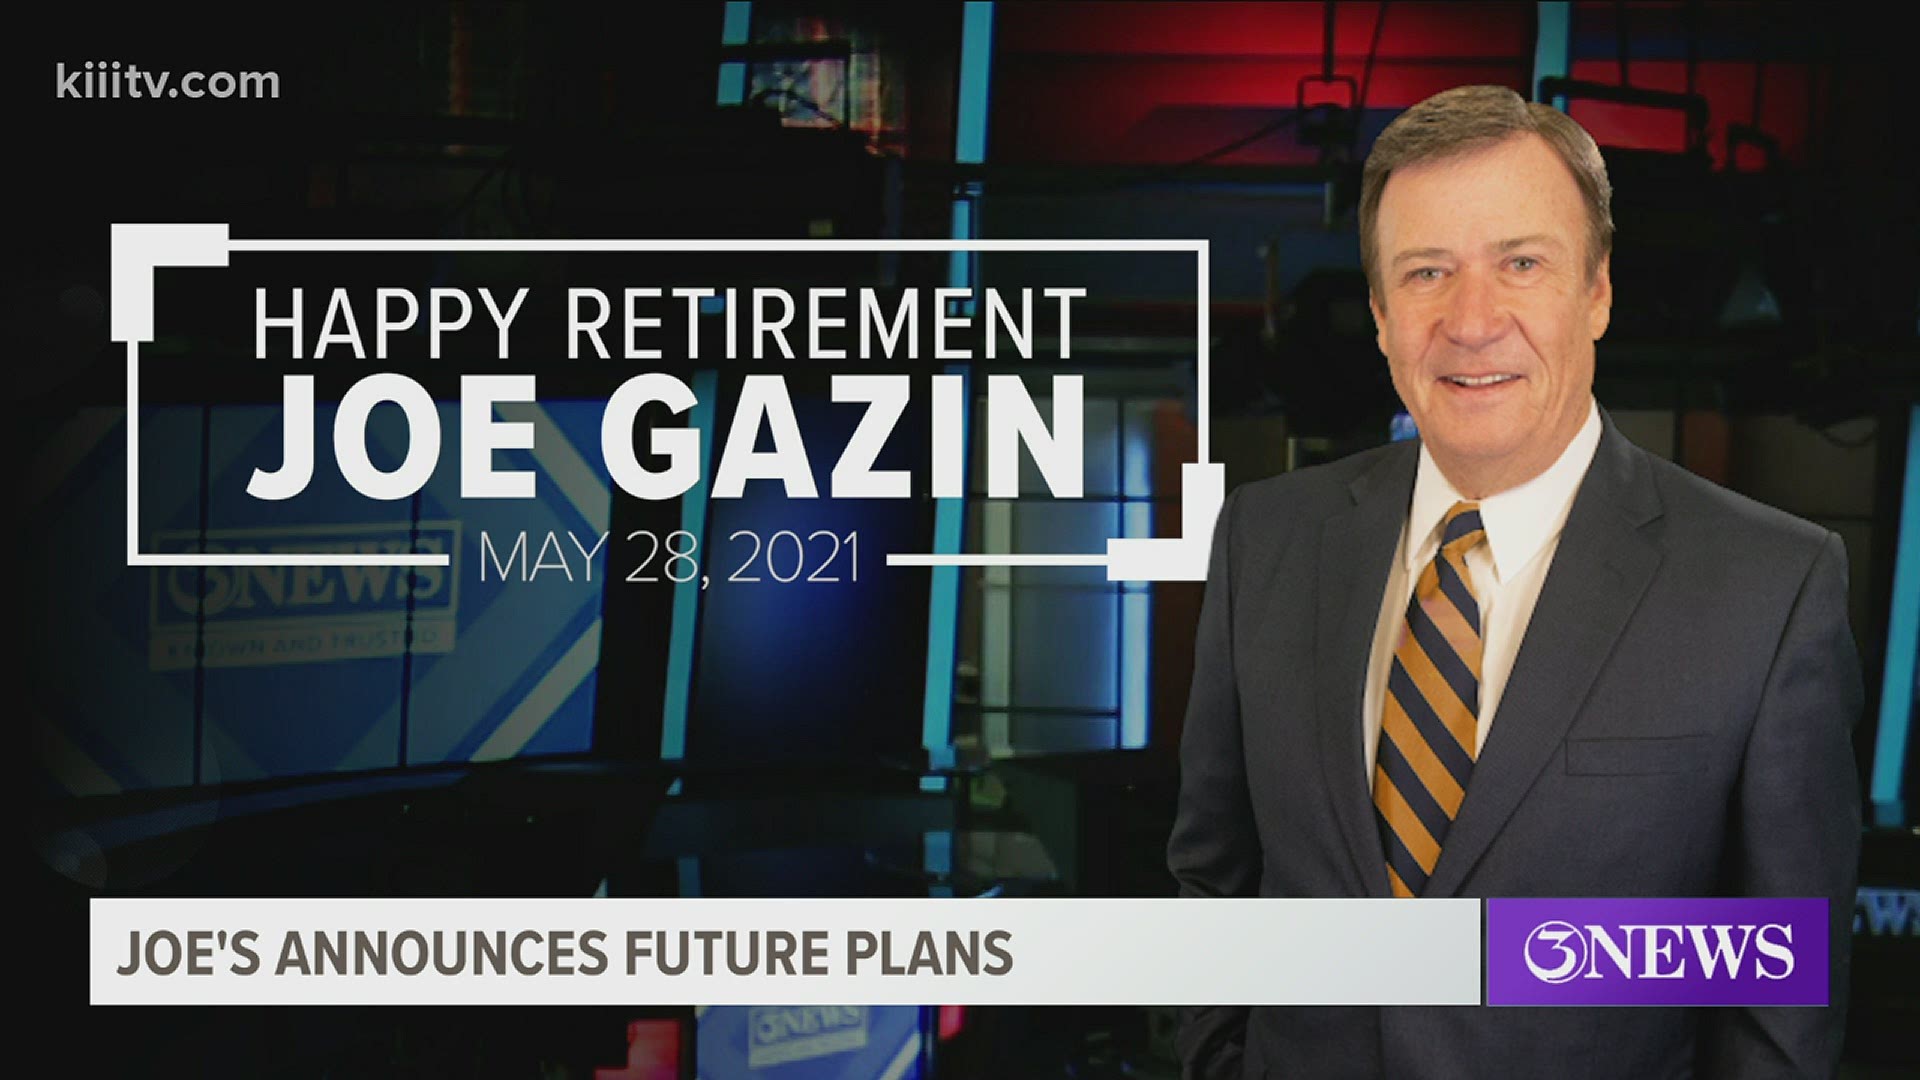 Over the years, Joe Gazin has been a beacon of light during times of crisis and a voice of truth in troubling times.